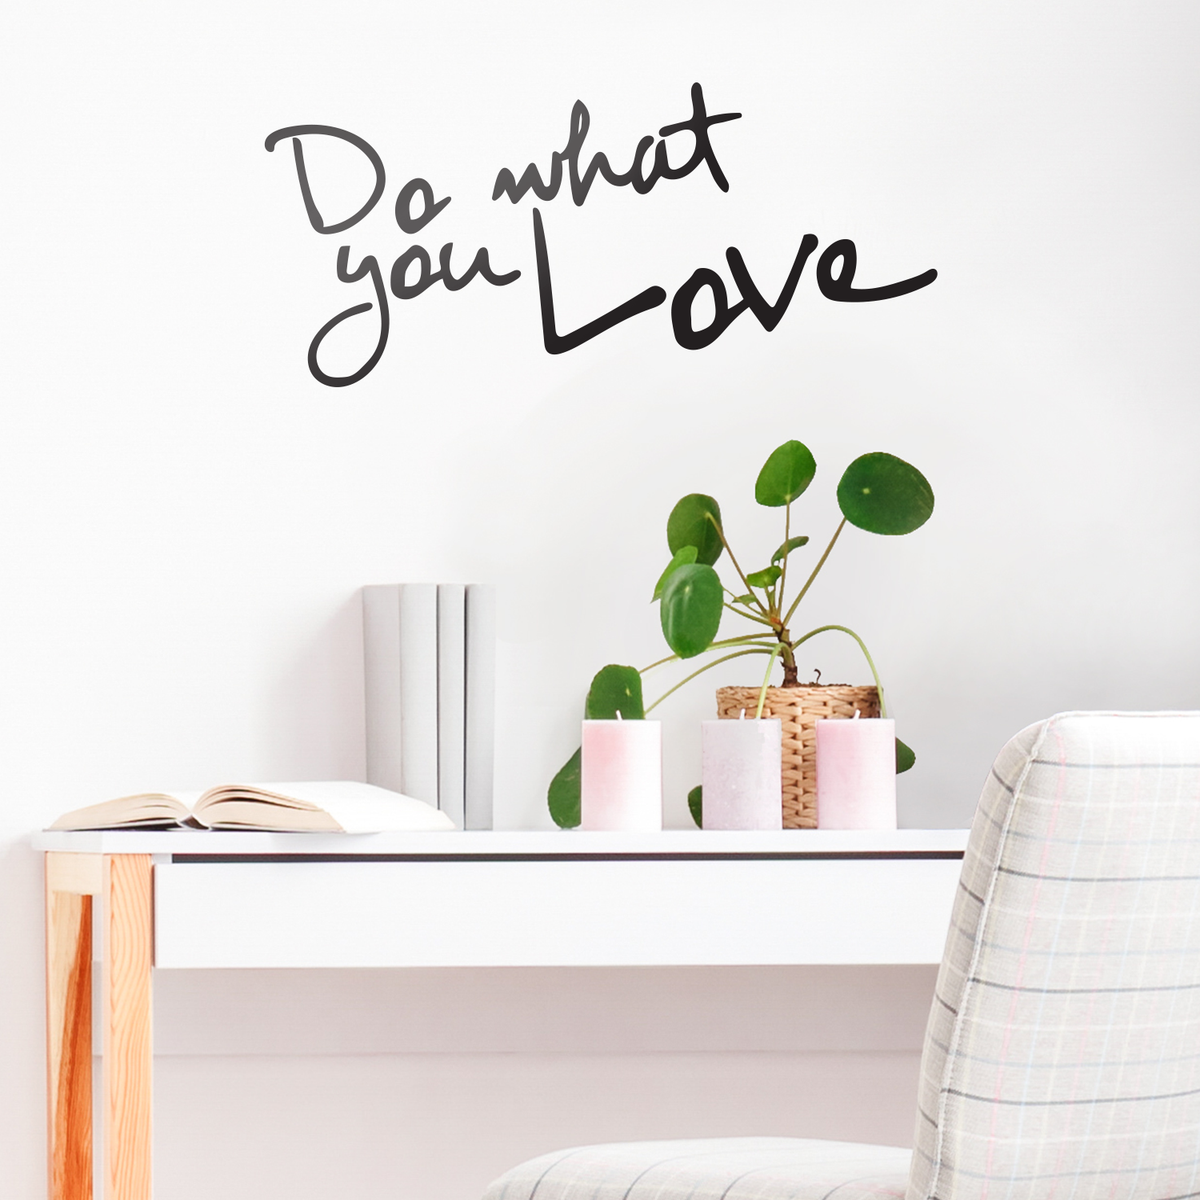 Do What You Love - Quotes Decal Life Imprinted Inspirational Wall Art Designs x – - 14 30